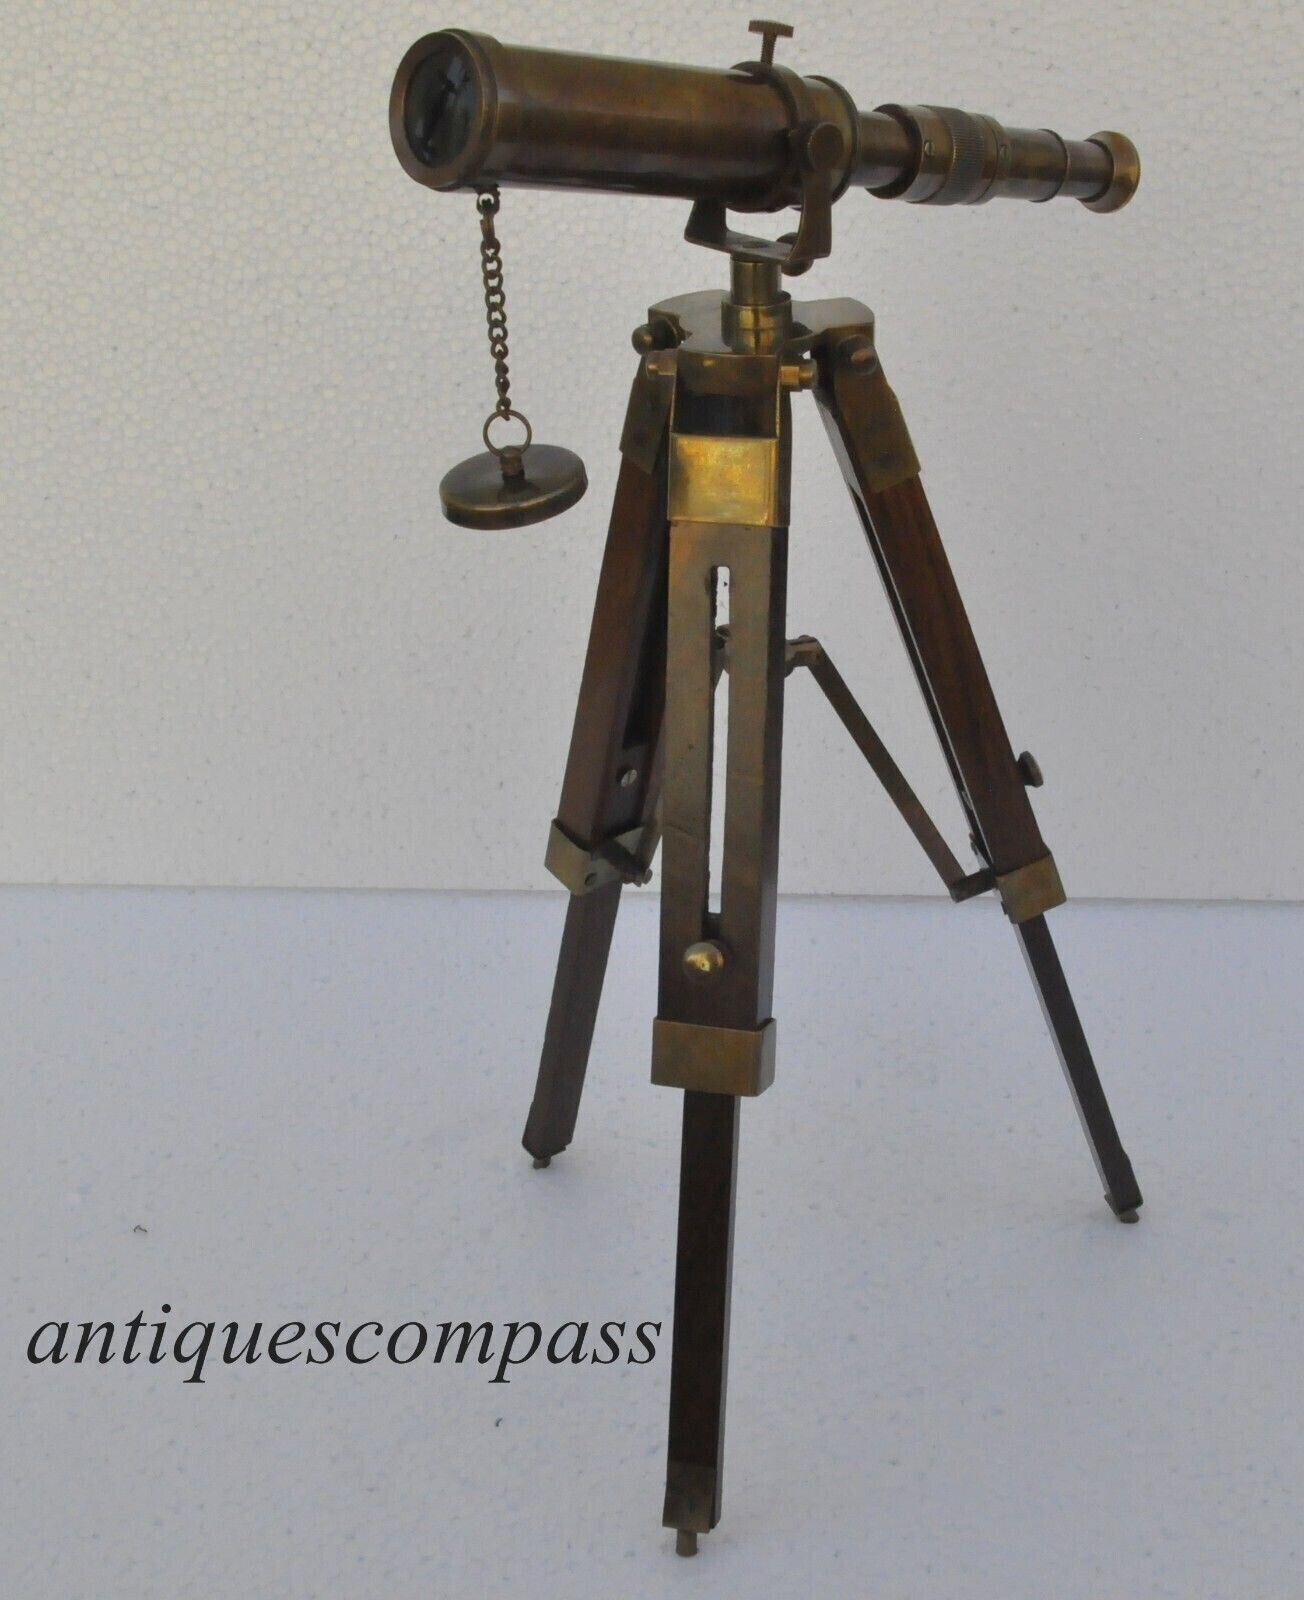 Antique Solid Brass Telescope With Wooden Tripod Vintage Home Décor Item Gift